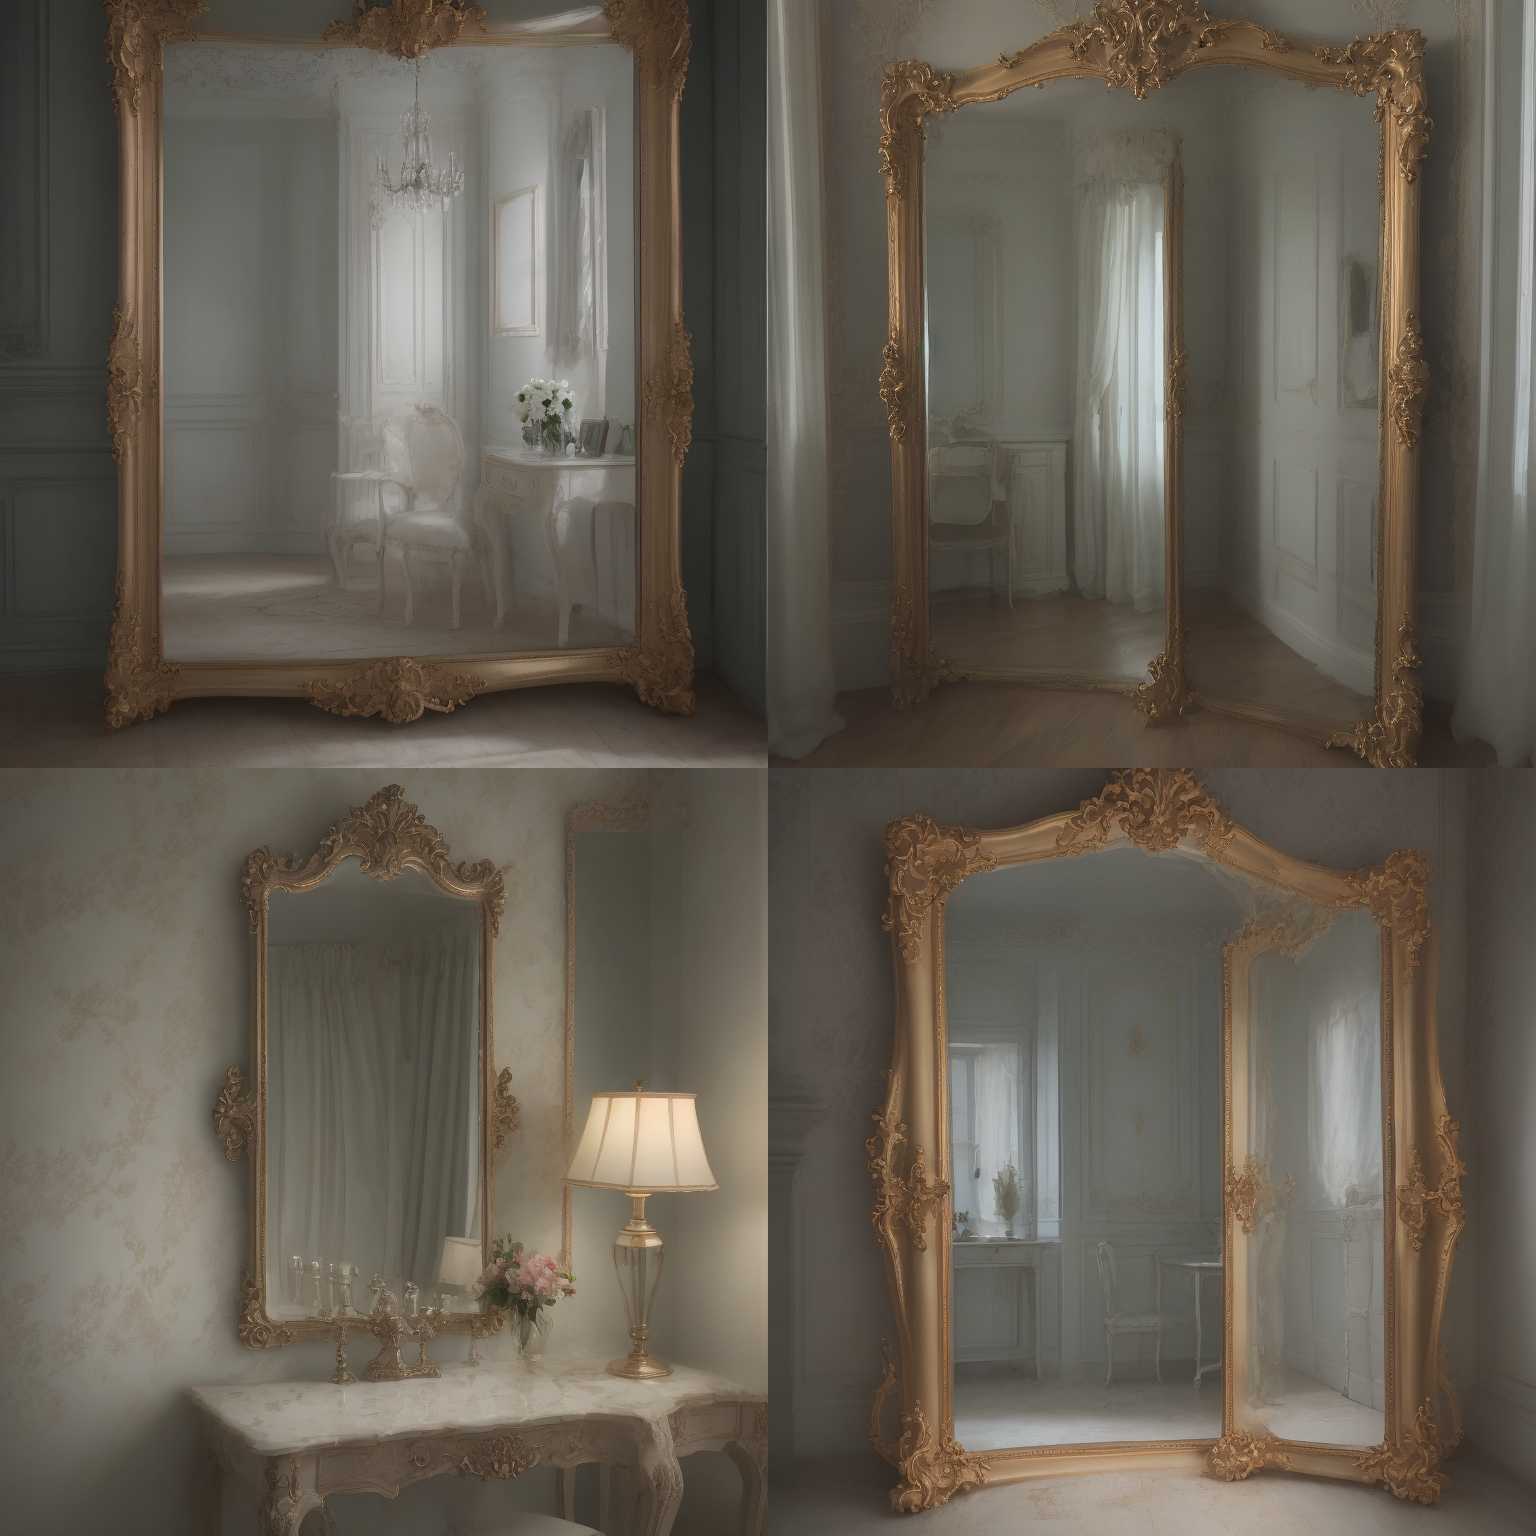 A mirror in a room without light